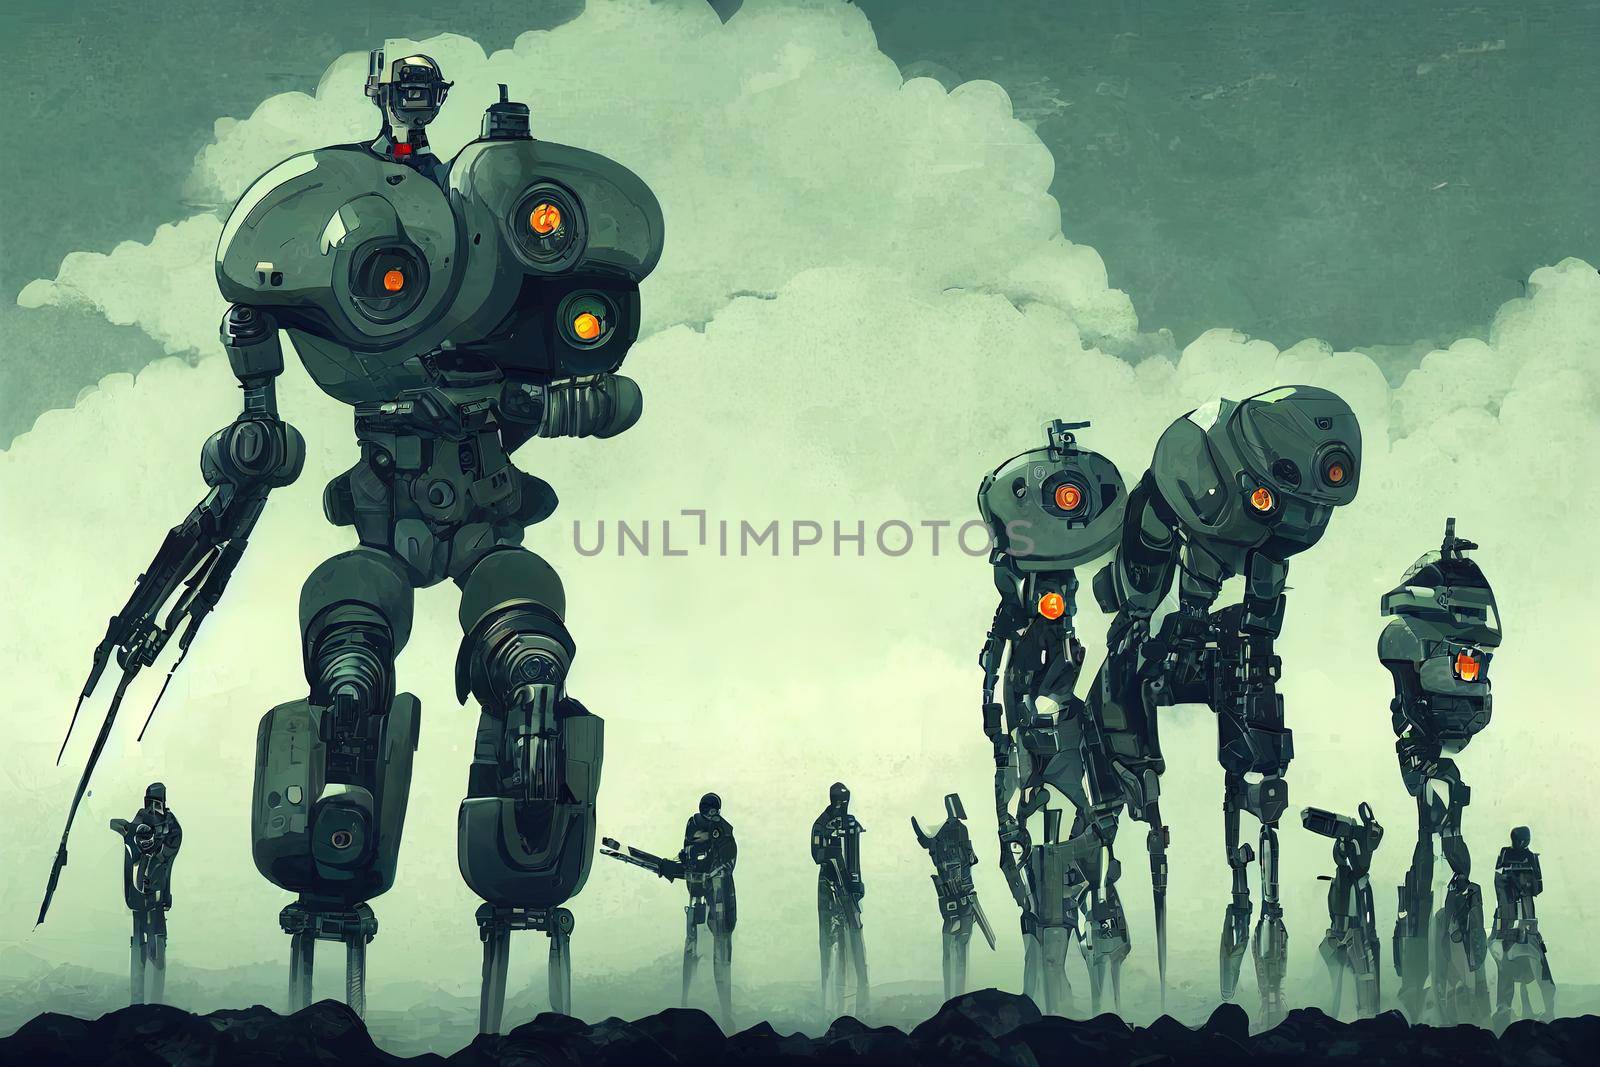 cyborg android male robots army with gun in hands high camera angle. High quality illustration